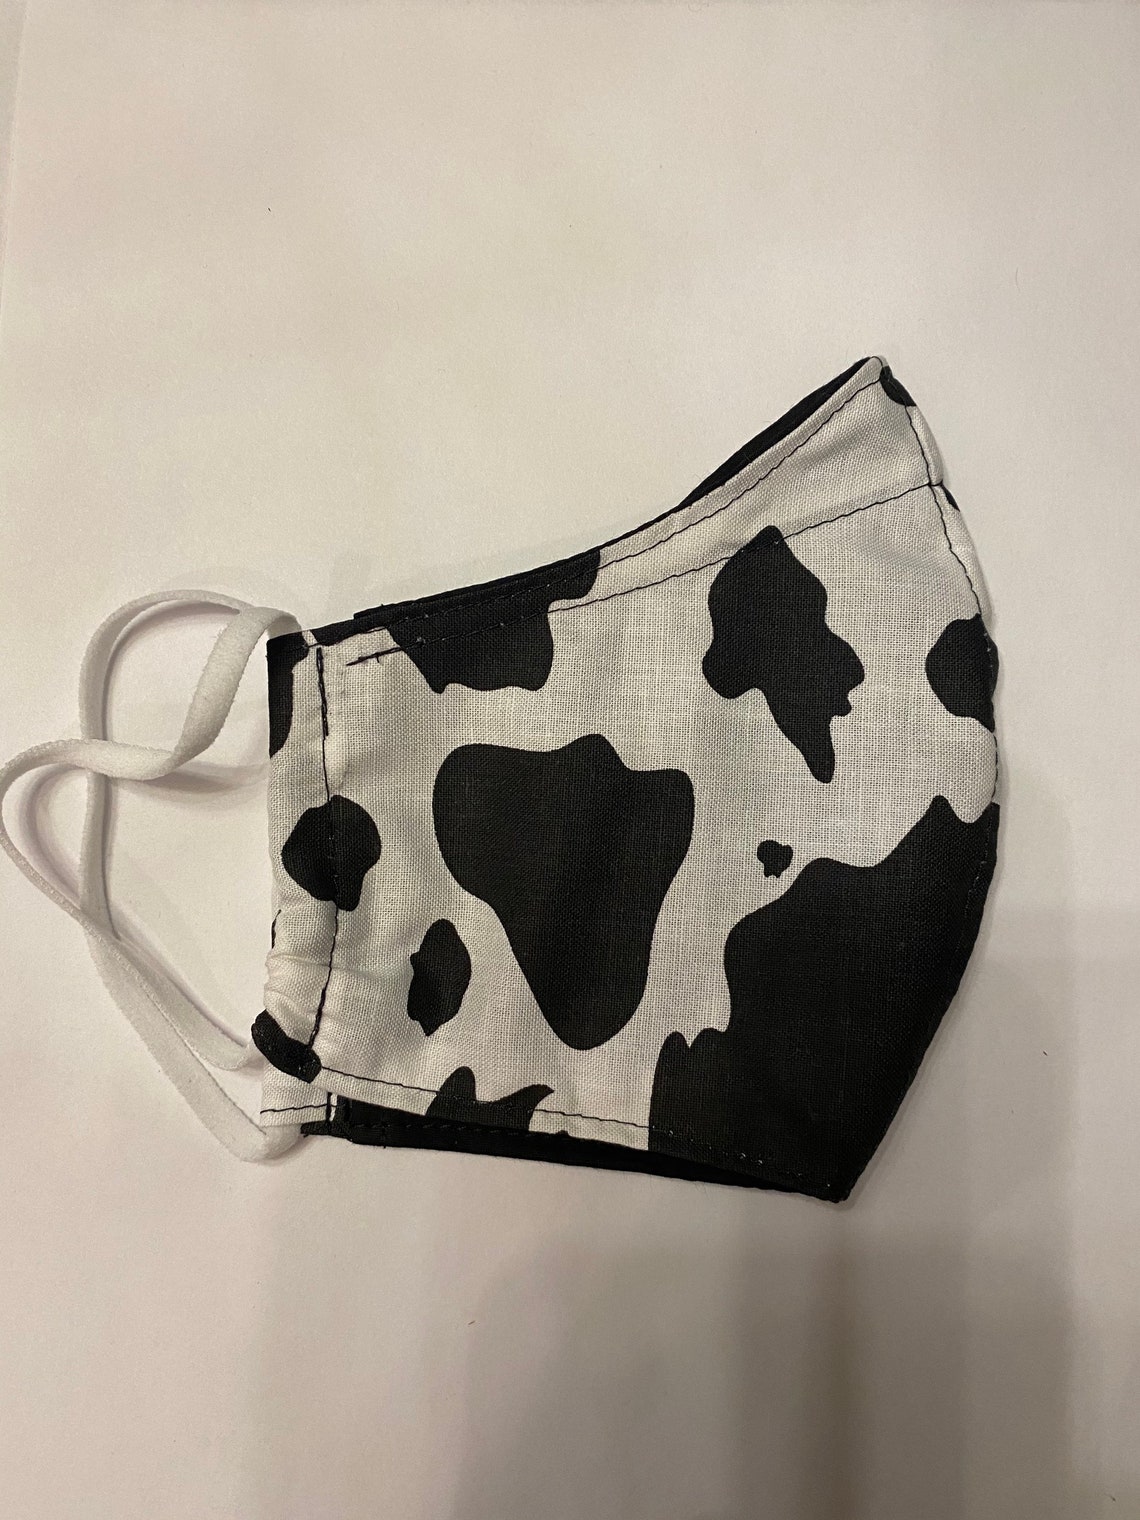 Cow print face mask | Etsy